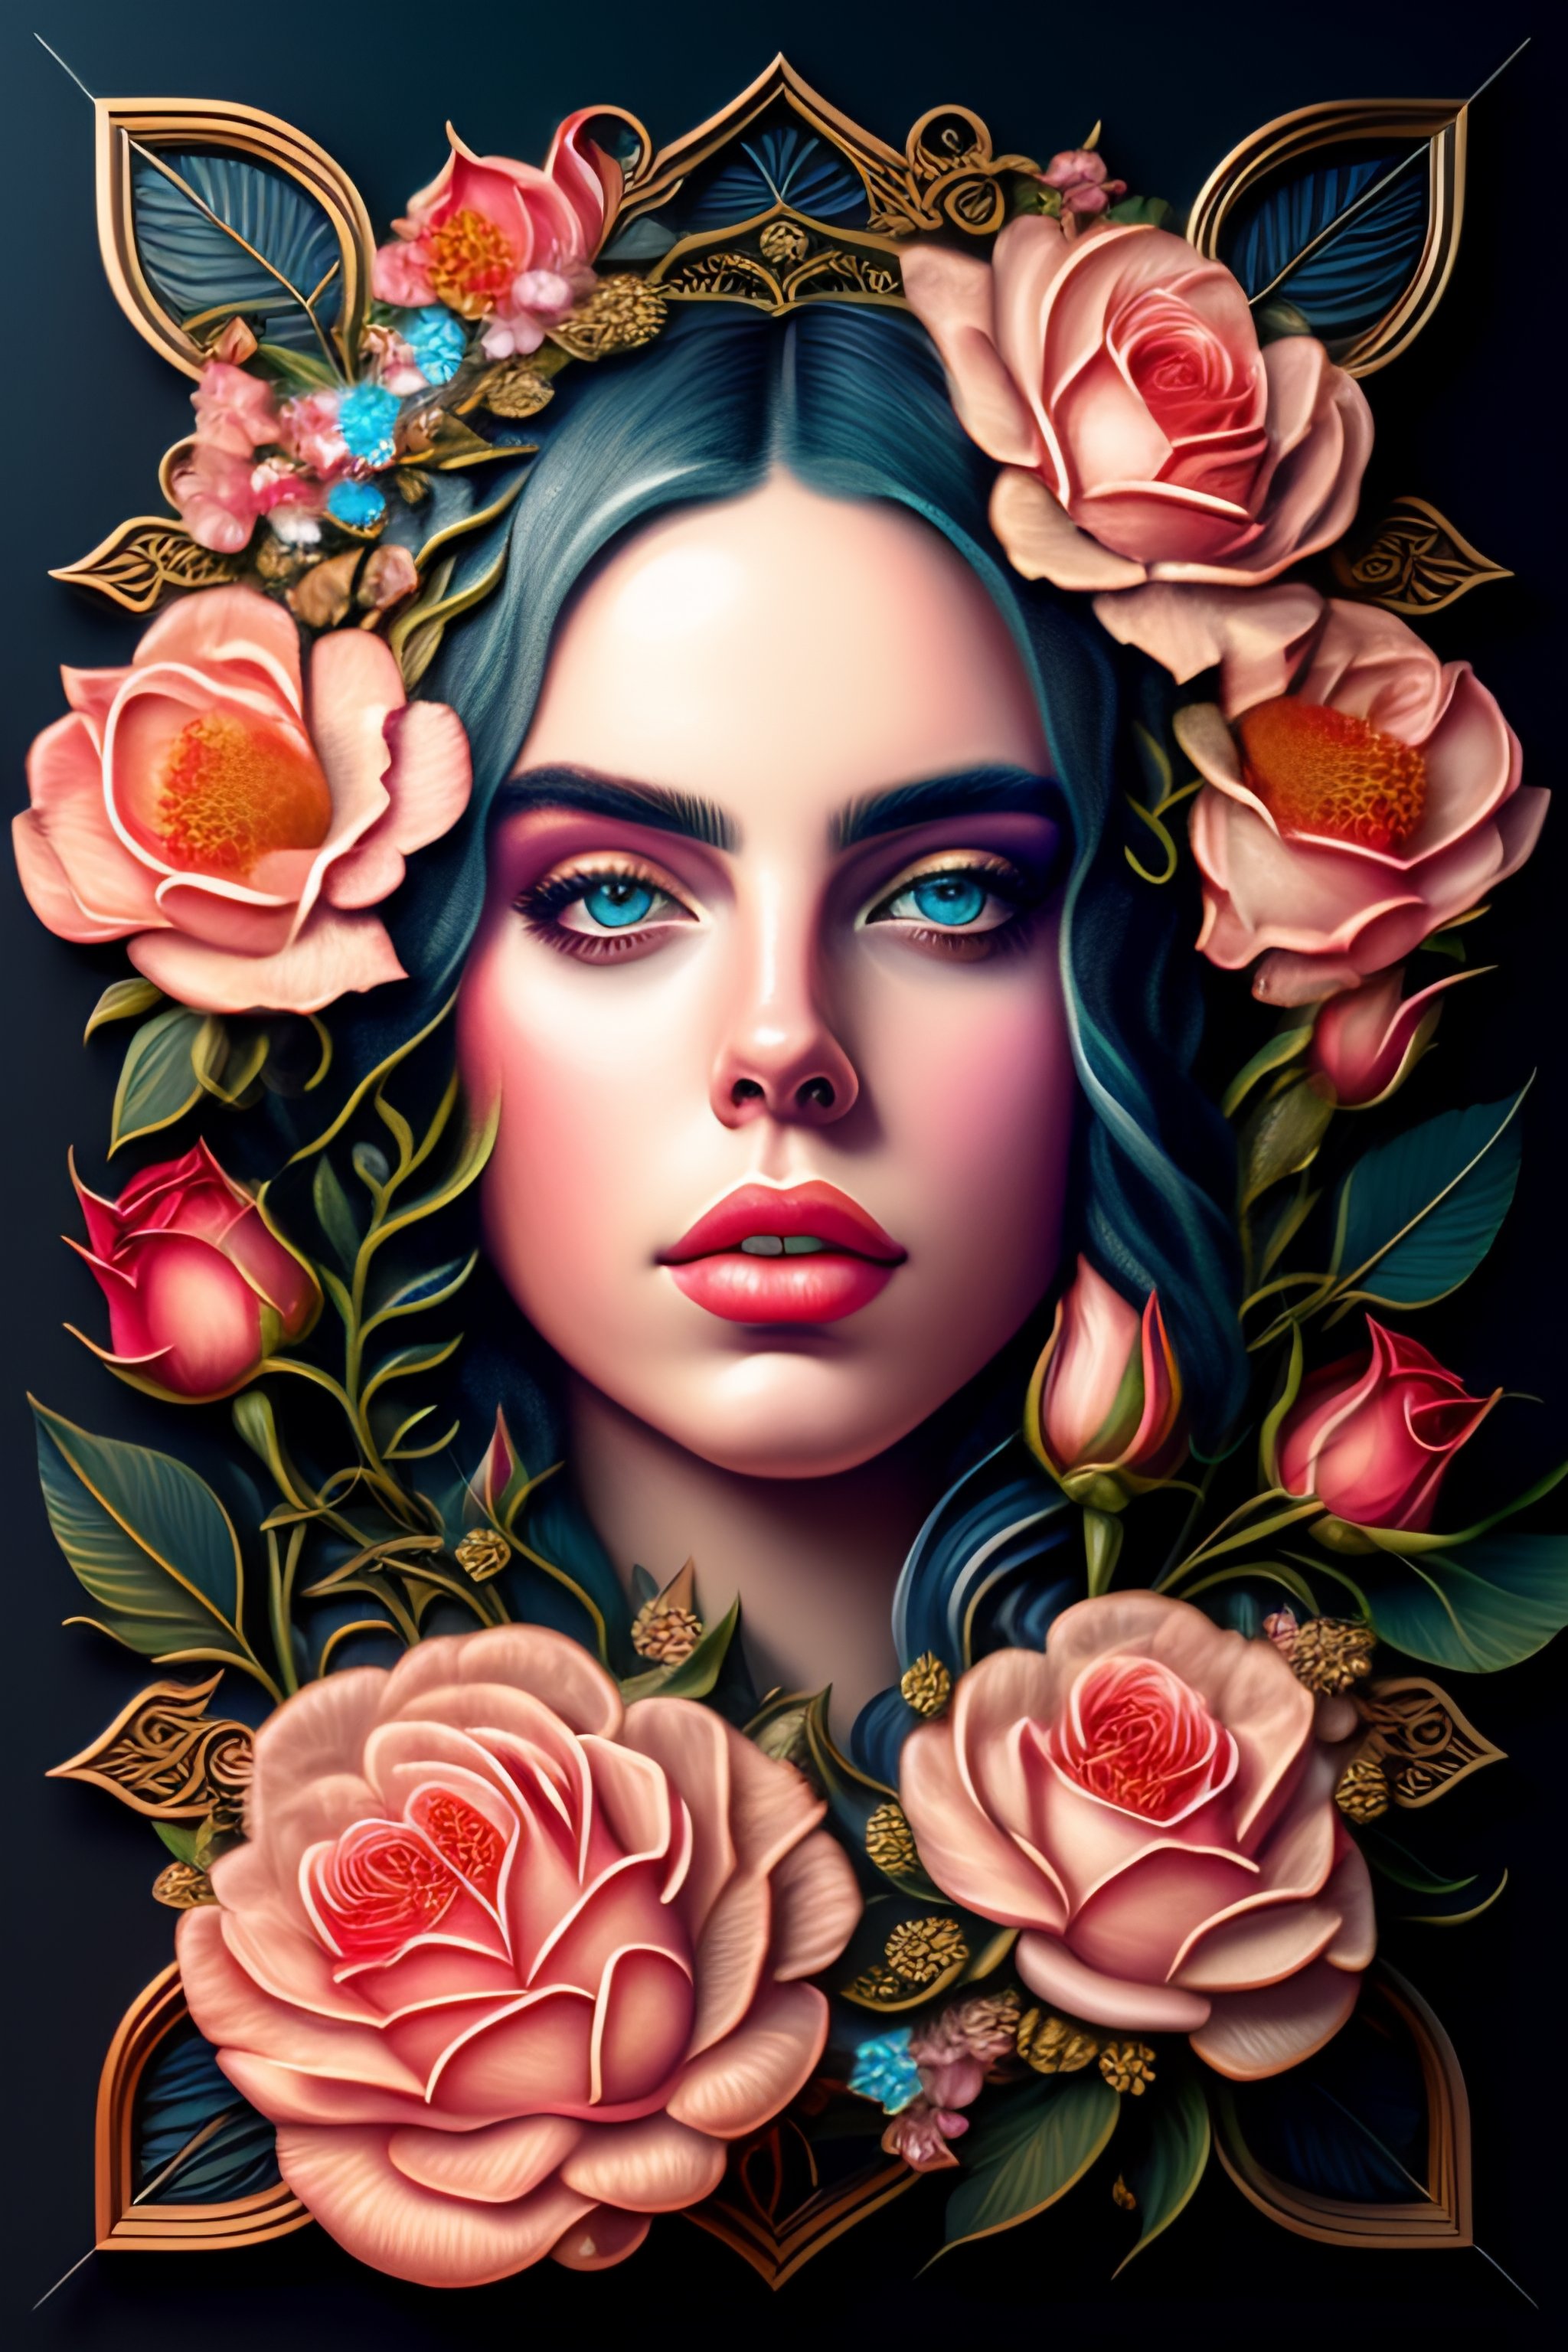 Lexica Billie Eilish With Classical Floral Elements Emanating From